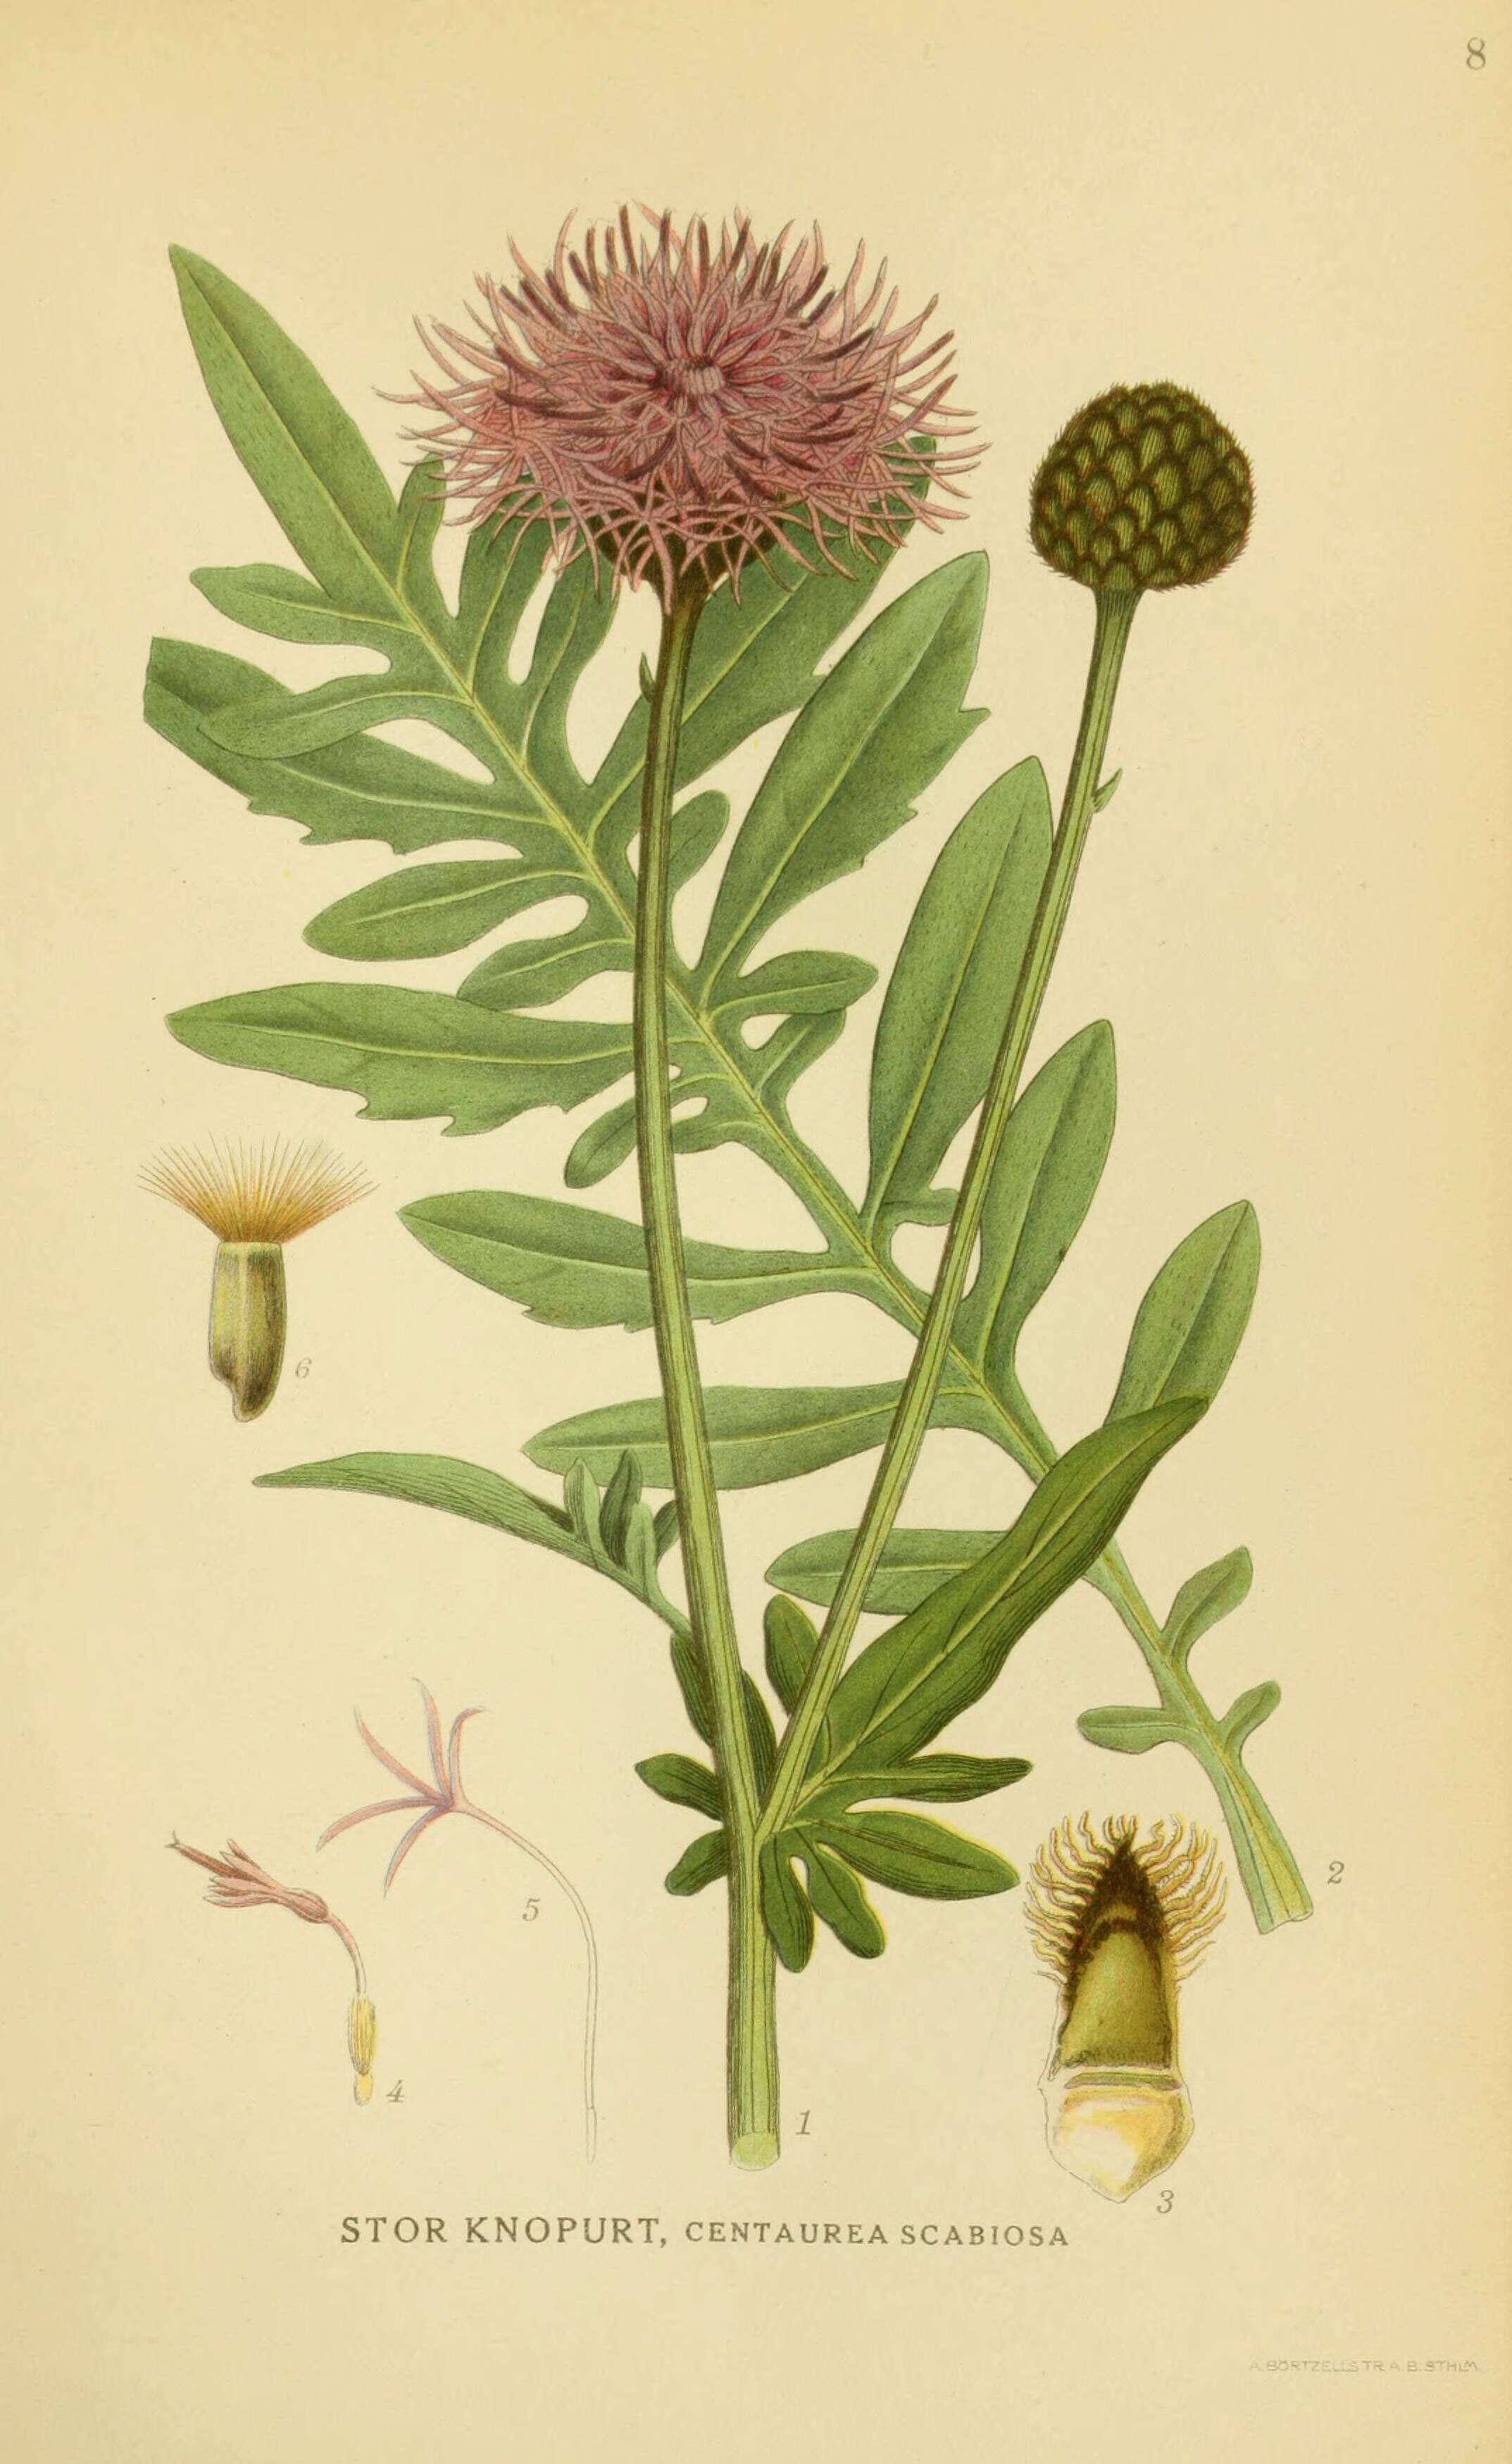 Image of greater knapweed